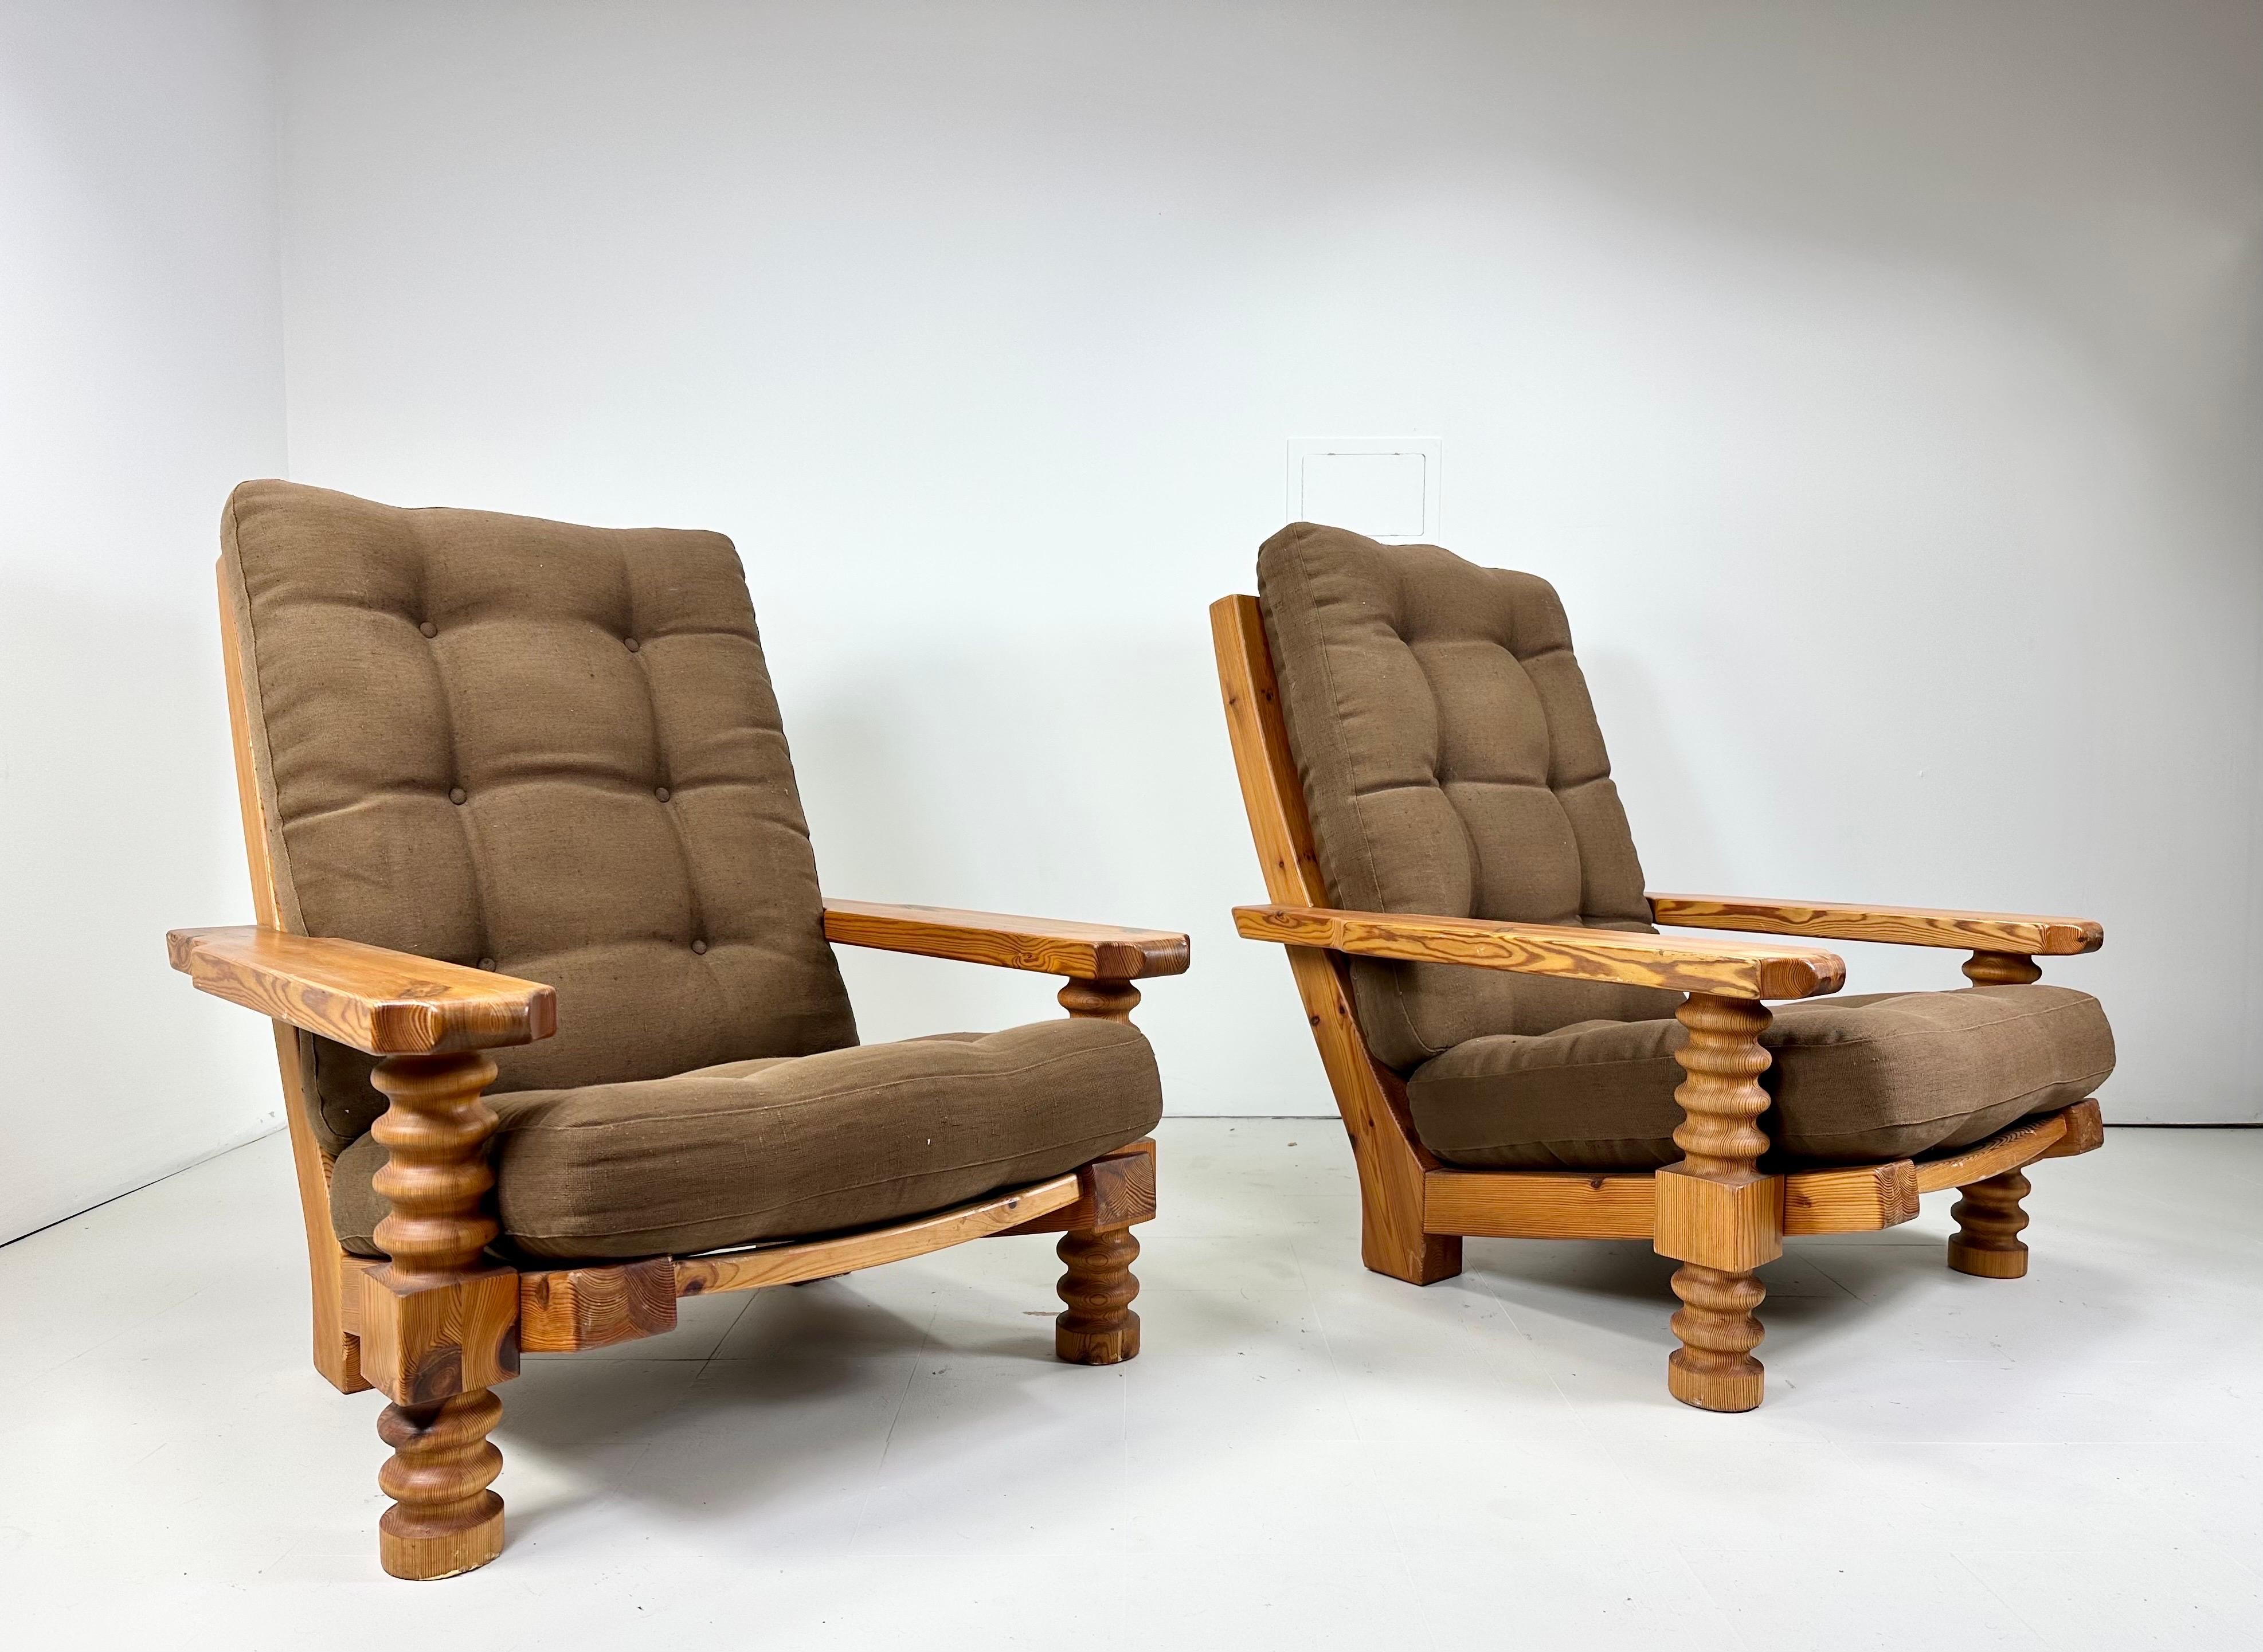 Pair of 1970’s lounge chairs. Large scale chairs made with solid pine. Chairs have figural grain patterns in the wood. Beautiful combination of rustic and modern. Made in Denmark.